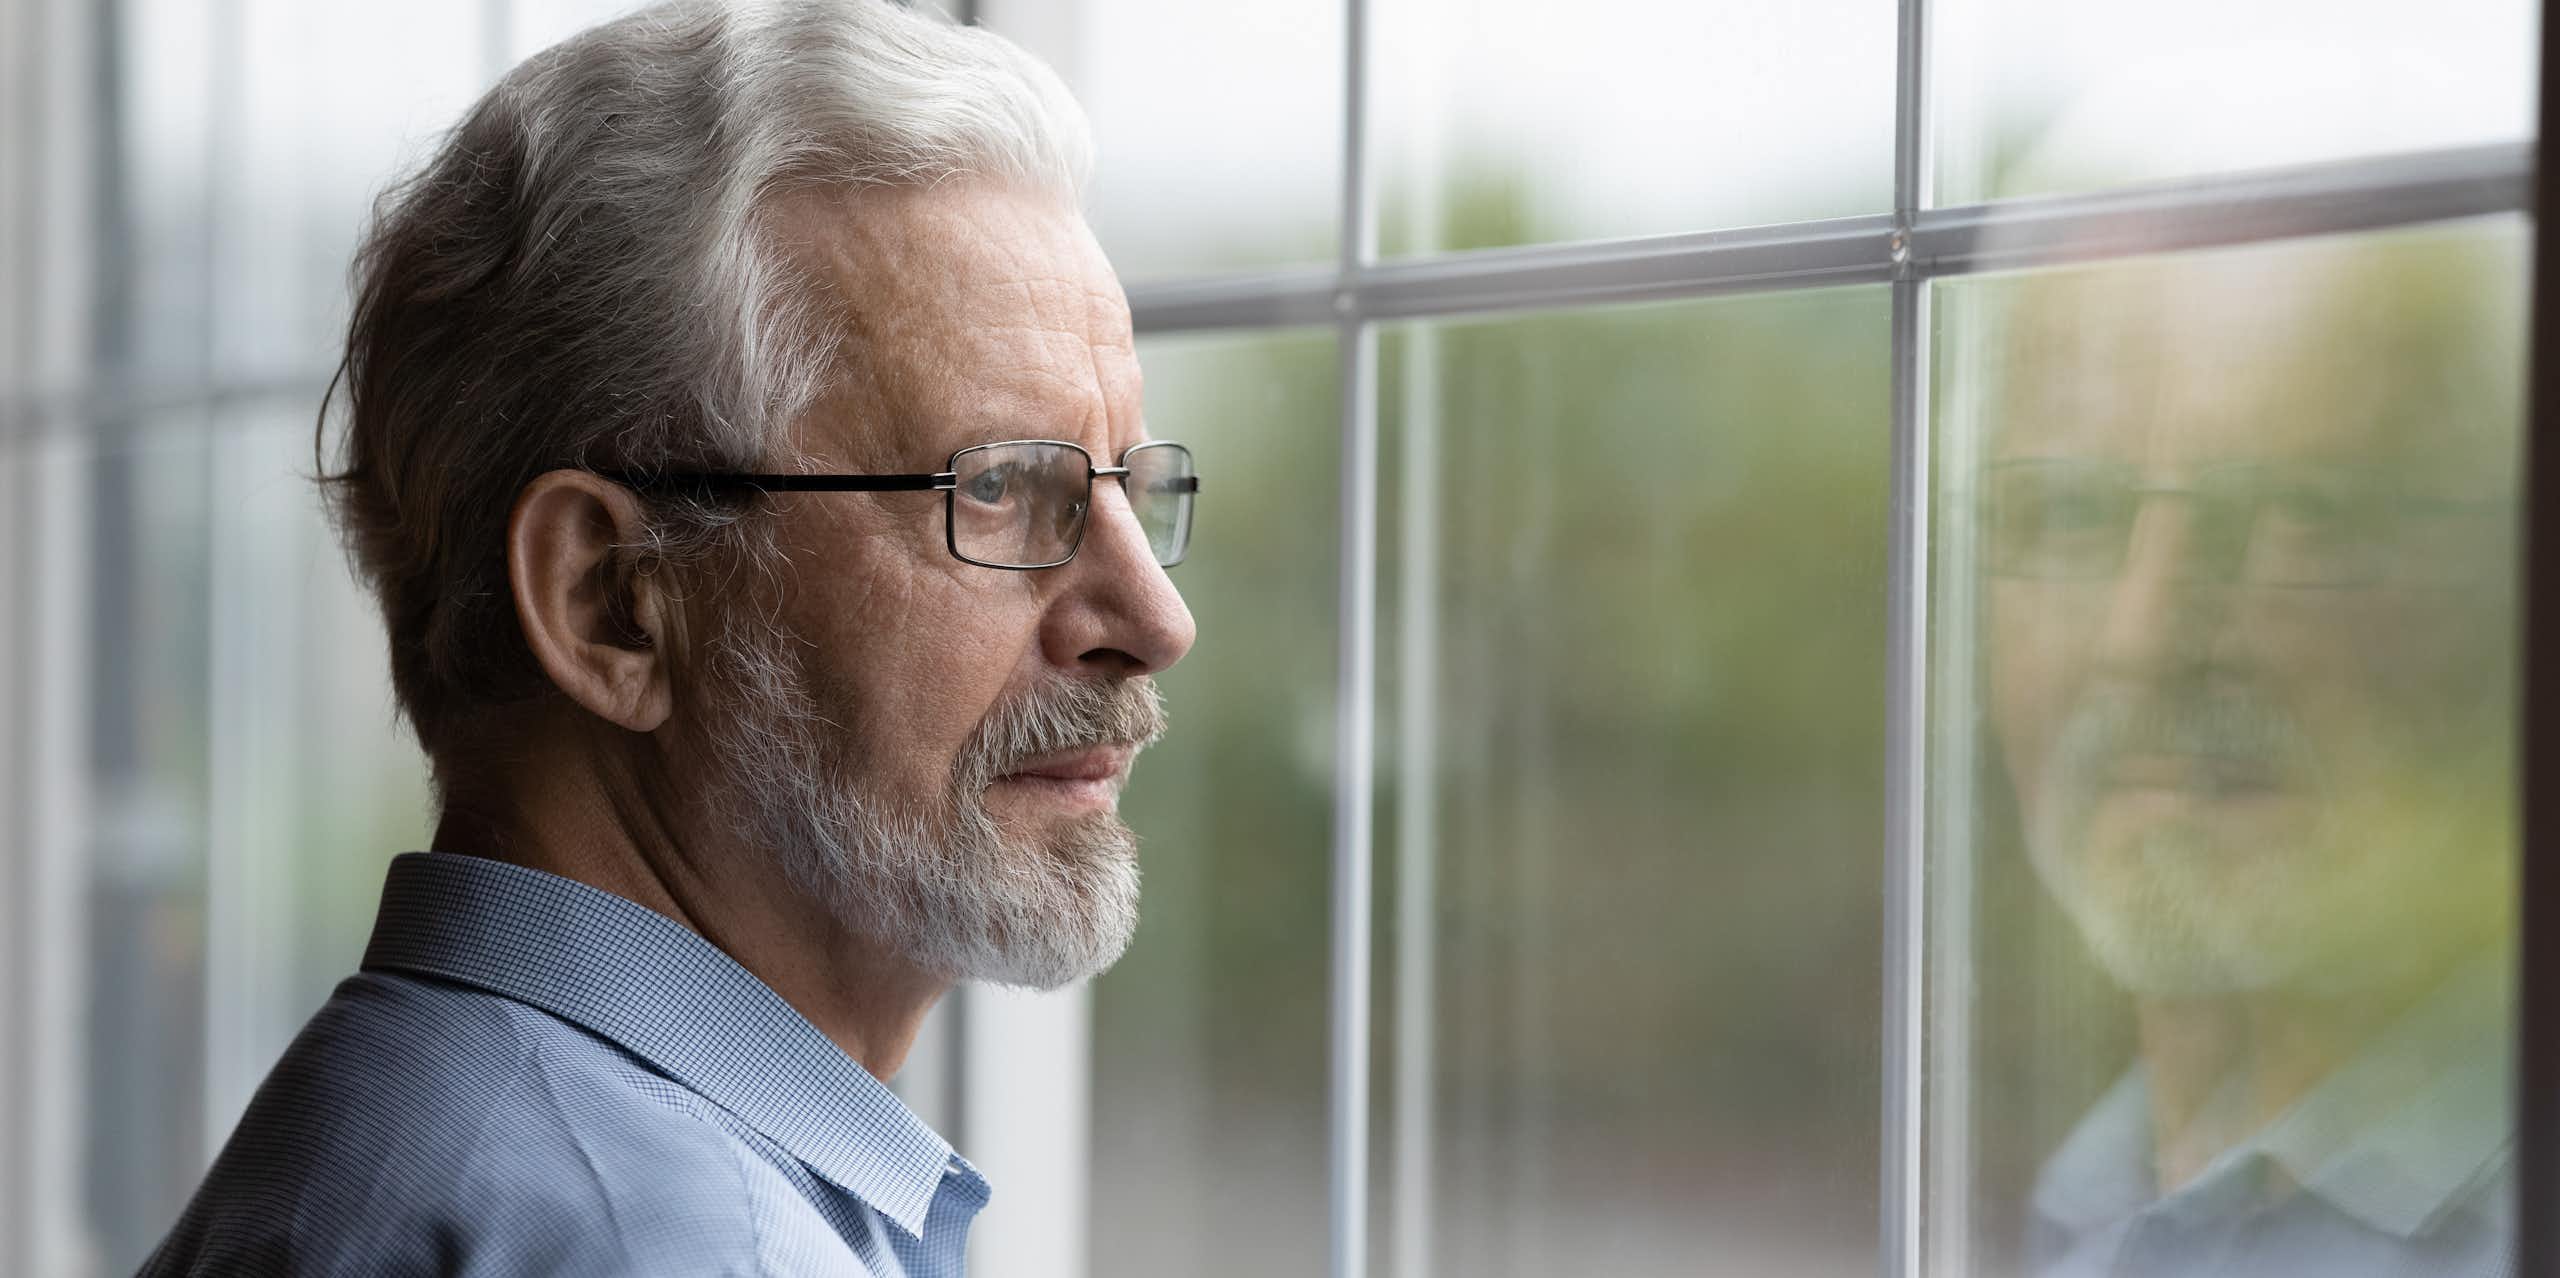 older man is looking out window and his reflection is seen in the glass